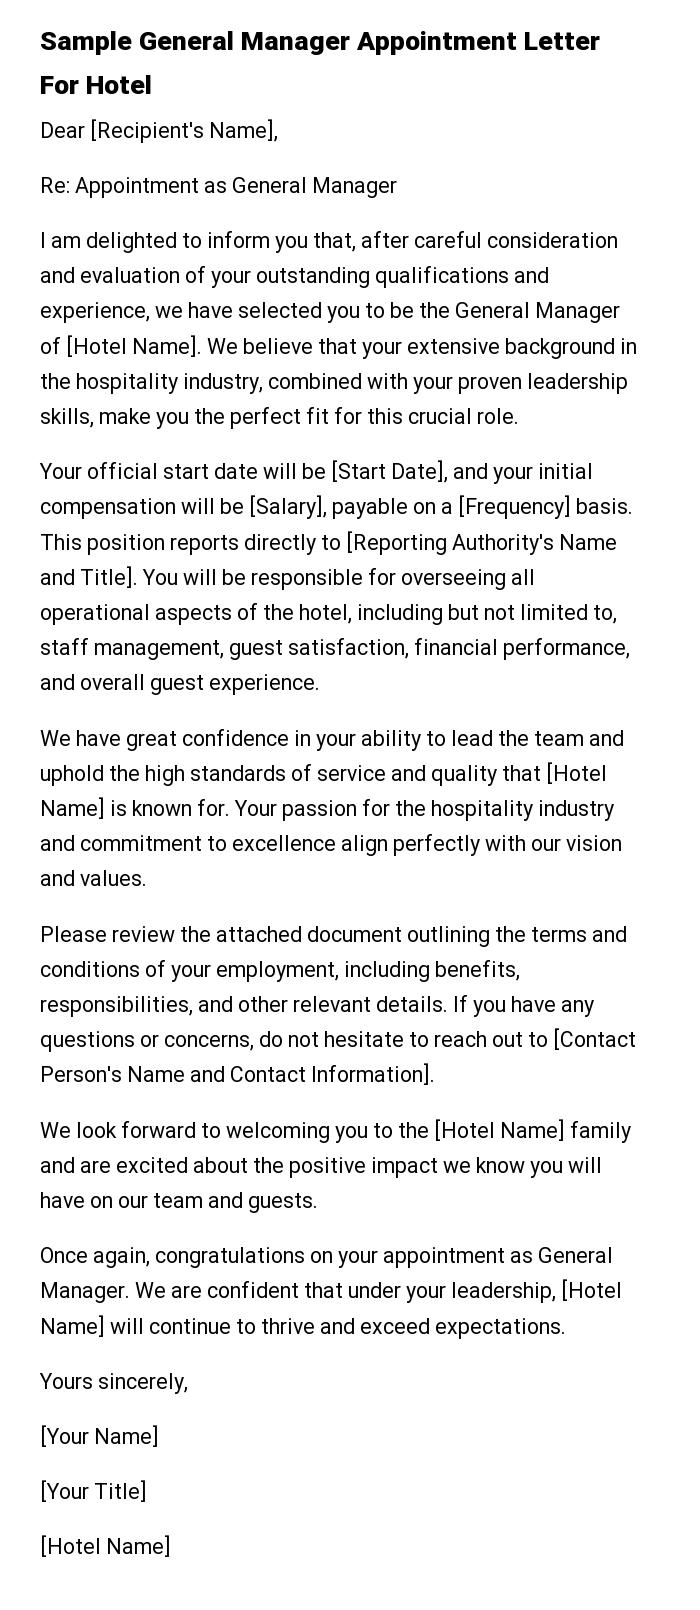 Sample General Manager Appointment Letter For Hotel